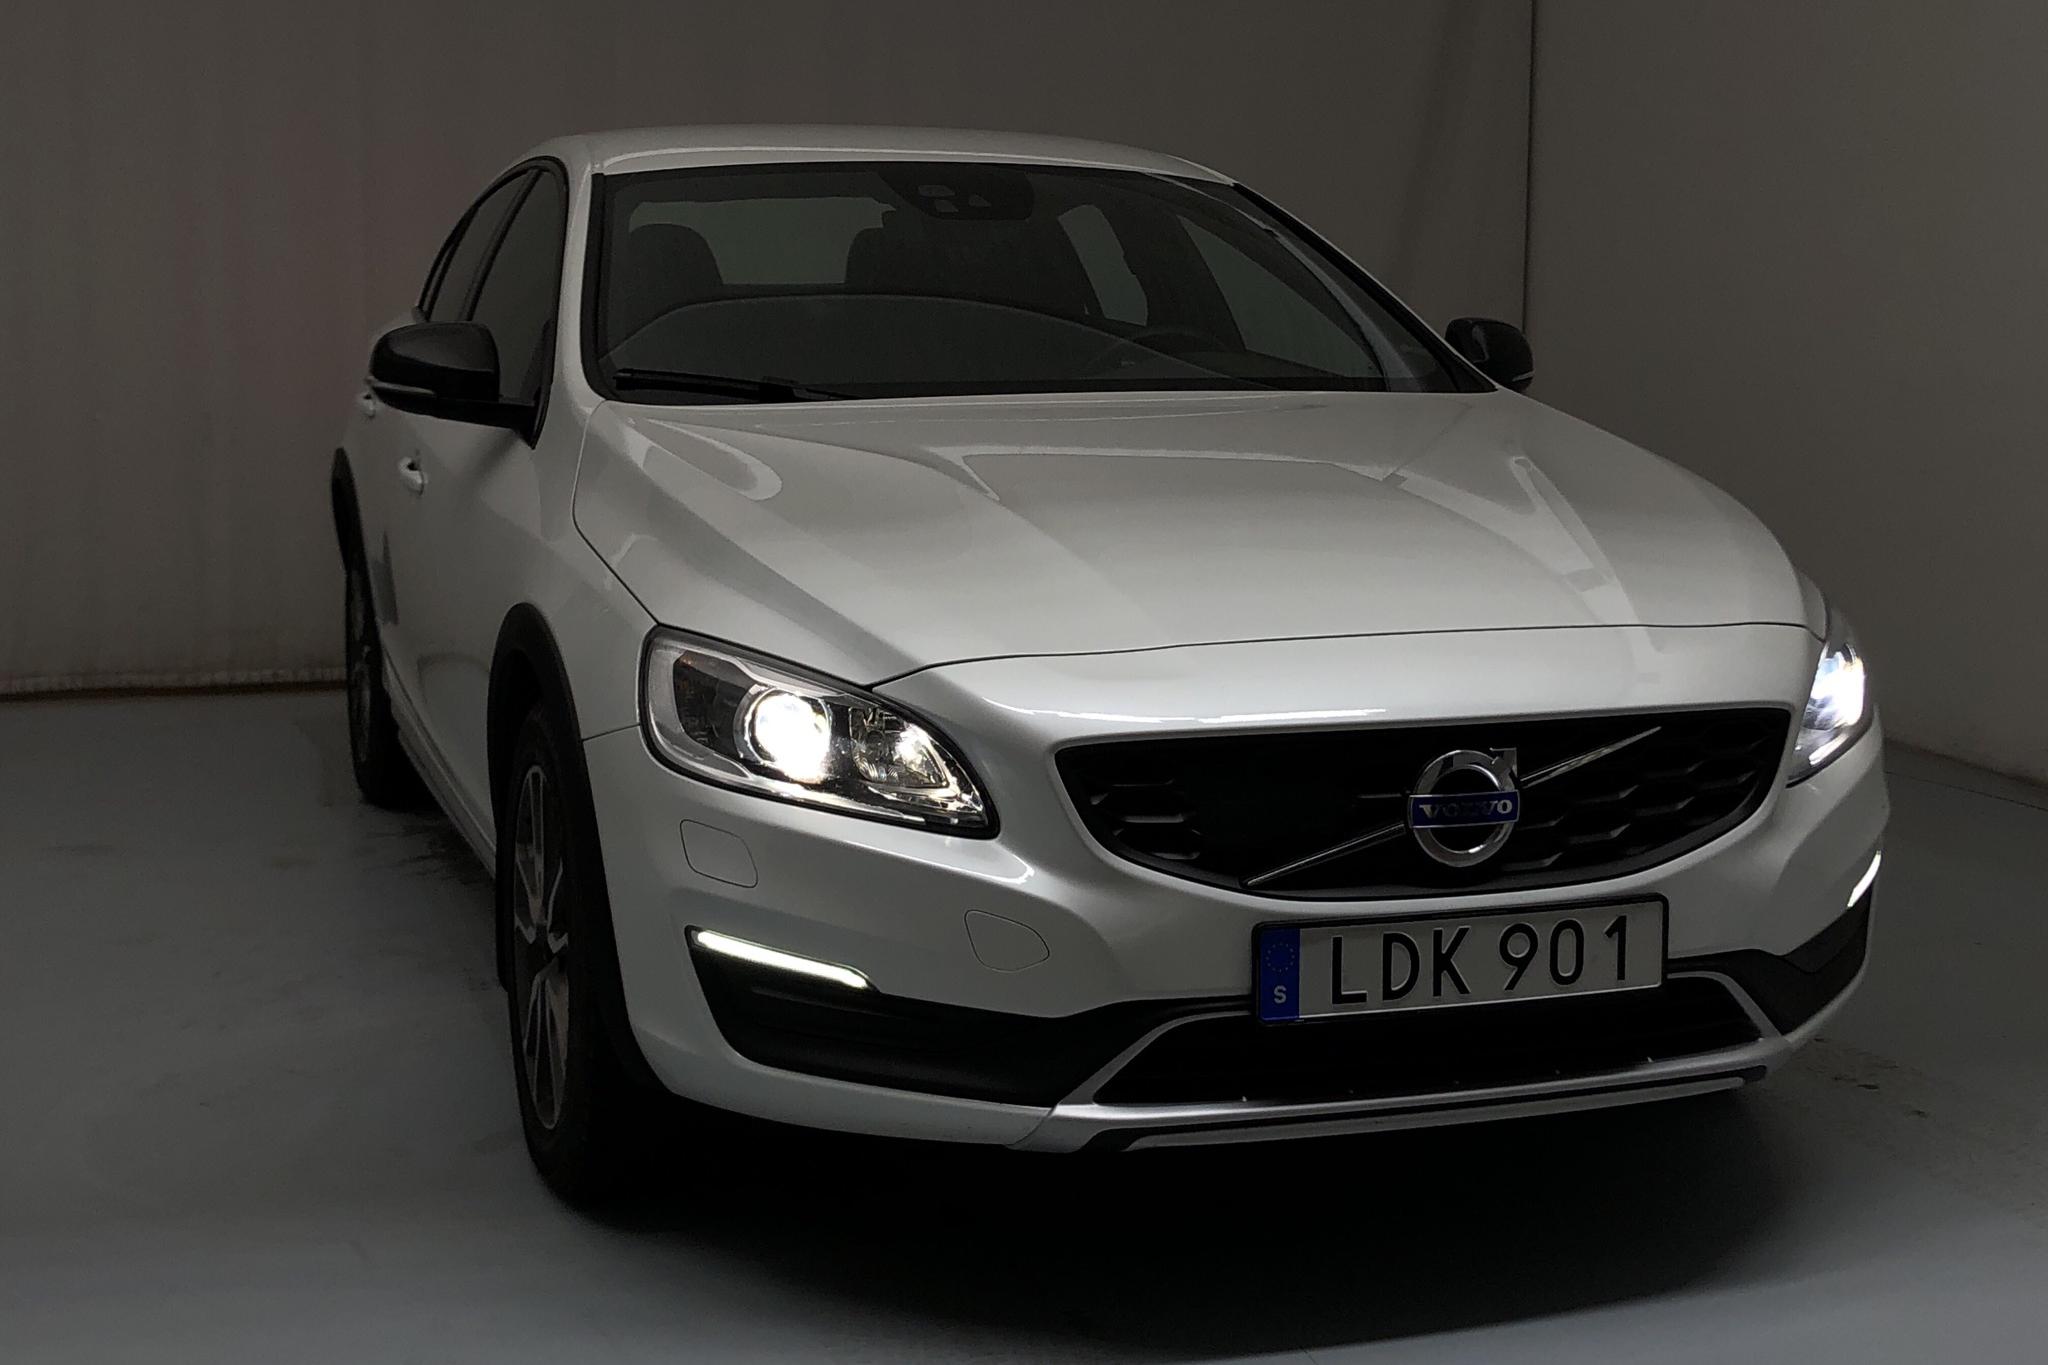 Volvo S60 D4 Cross Country AWD (190hk) - 35 560 km - Automatic - white - 2017